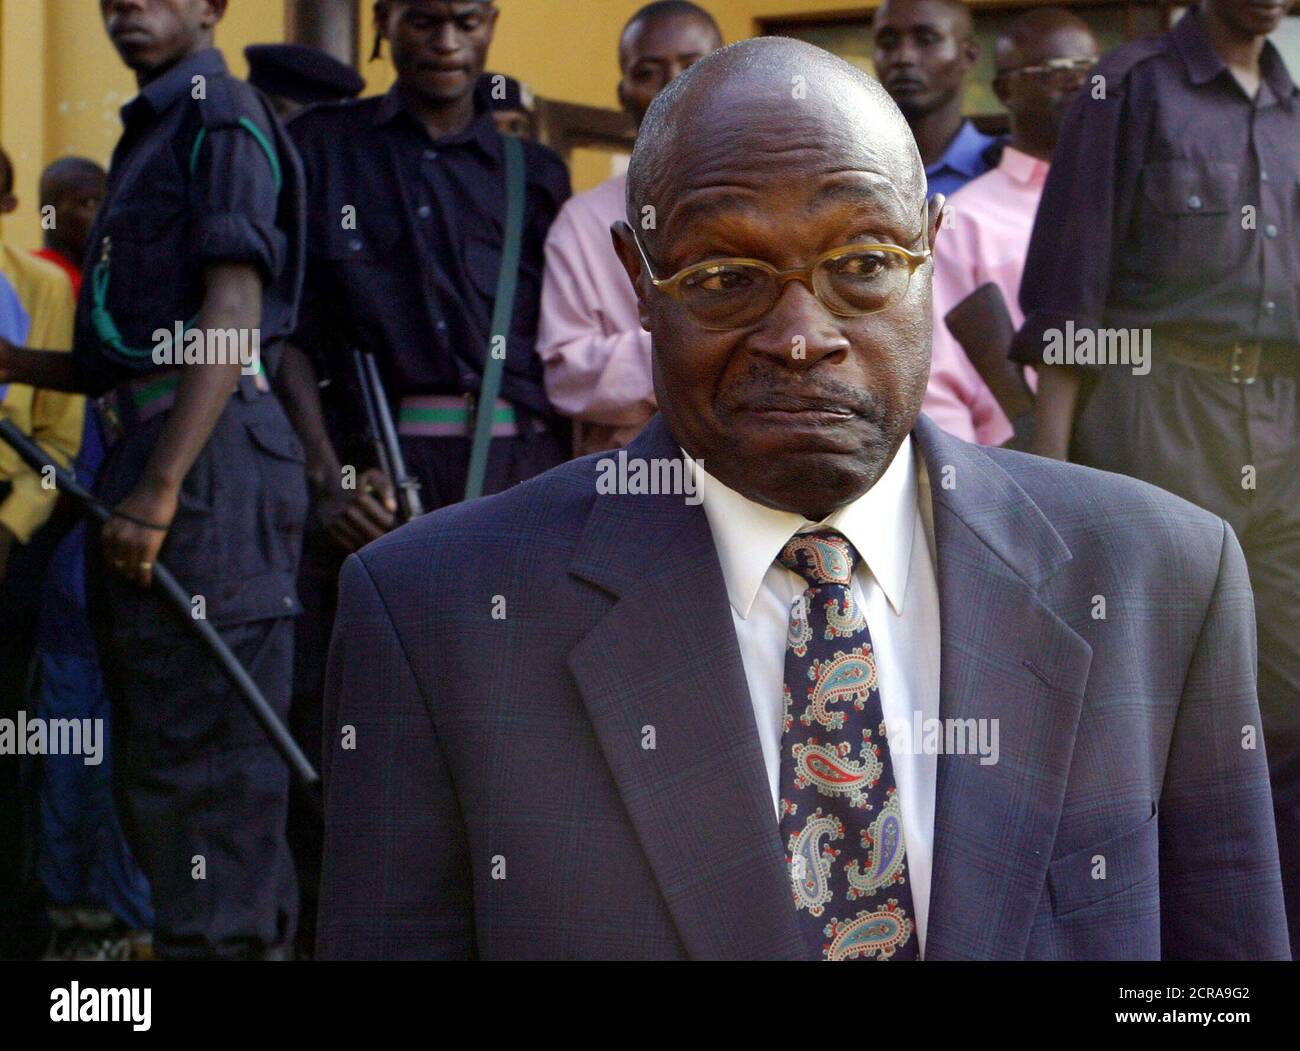 Former Rwandan president Pasteur Bizimungu, shrugs as he leaves a court  house in the capital Kigali on Monday June 7, 2004 after being sentenced to  15 years in prison for inciting ethnic